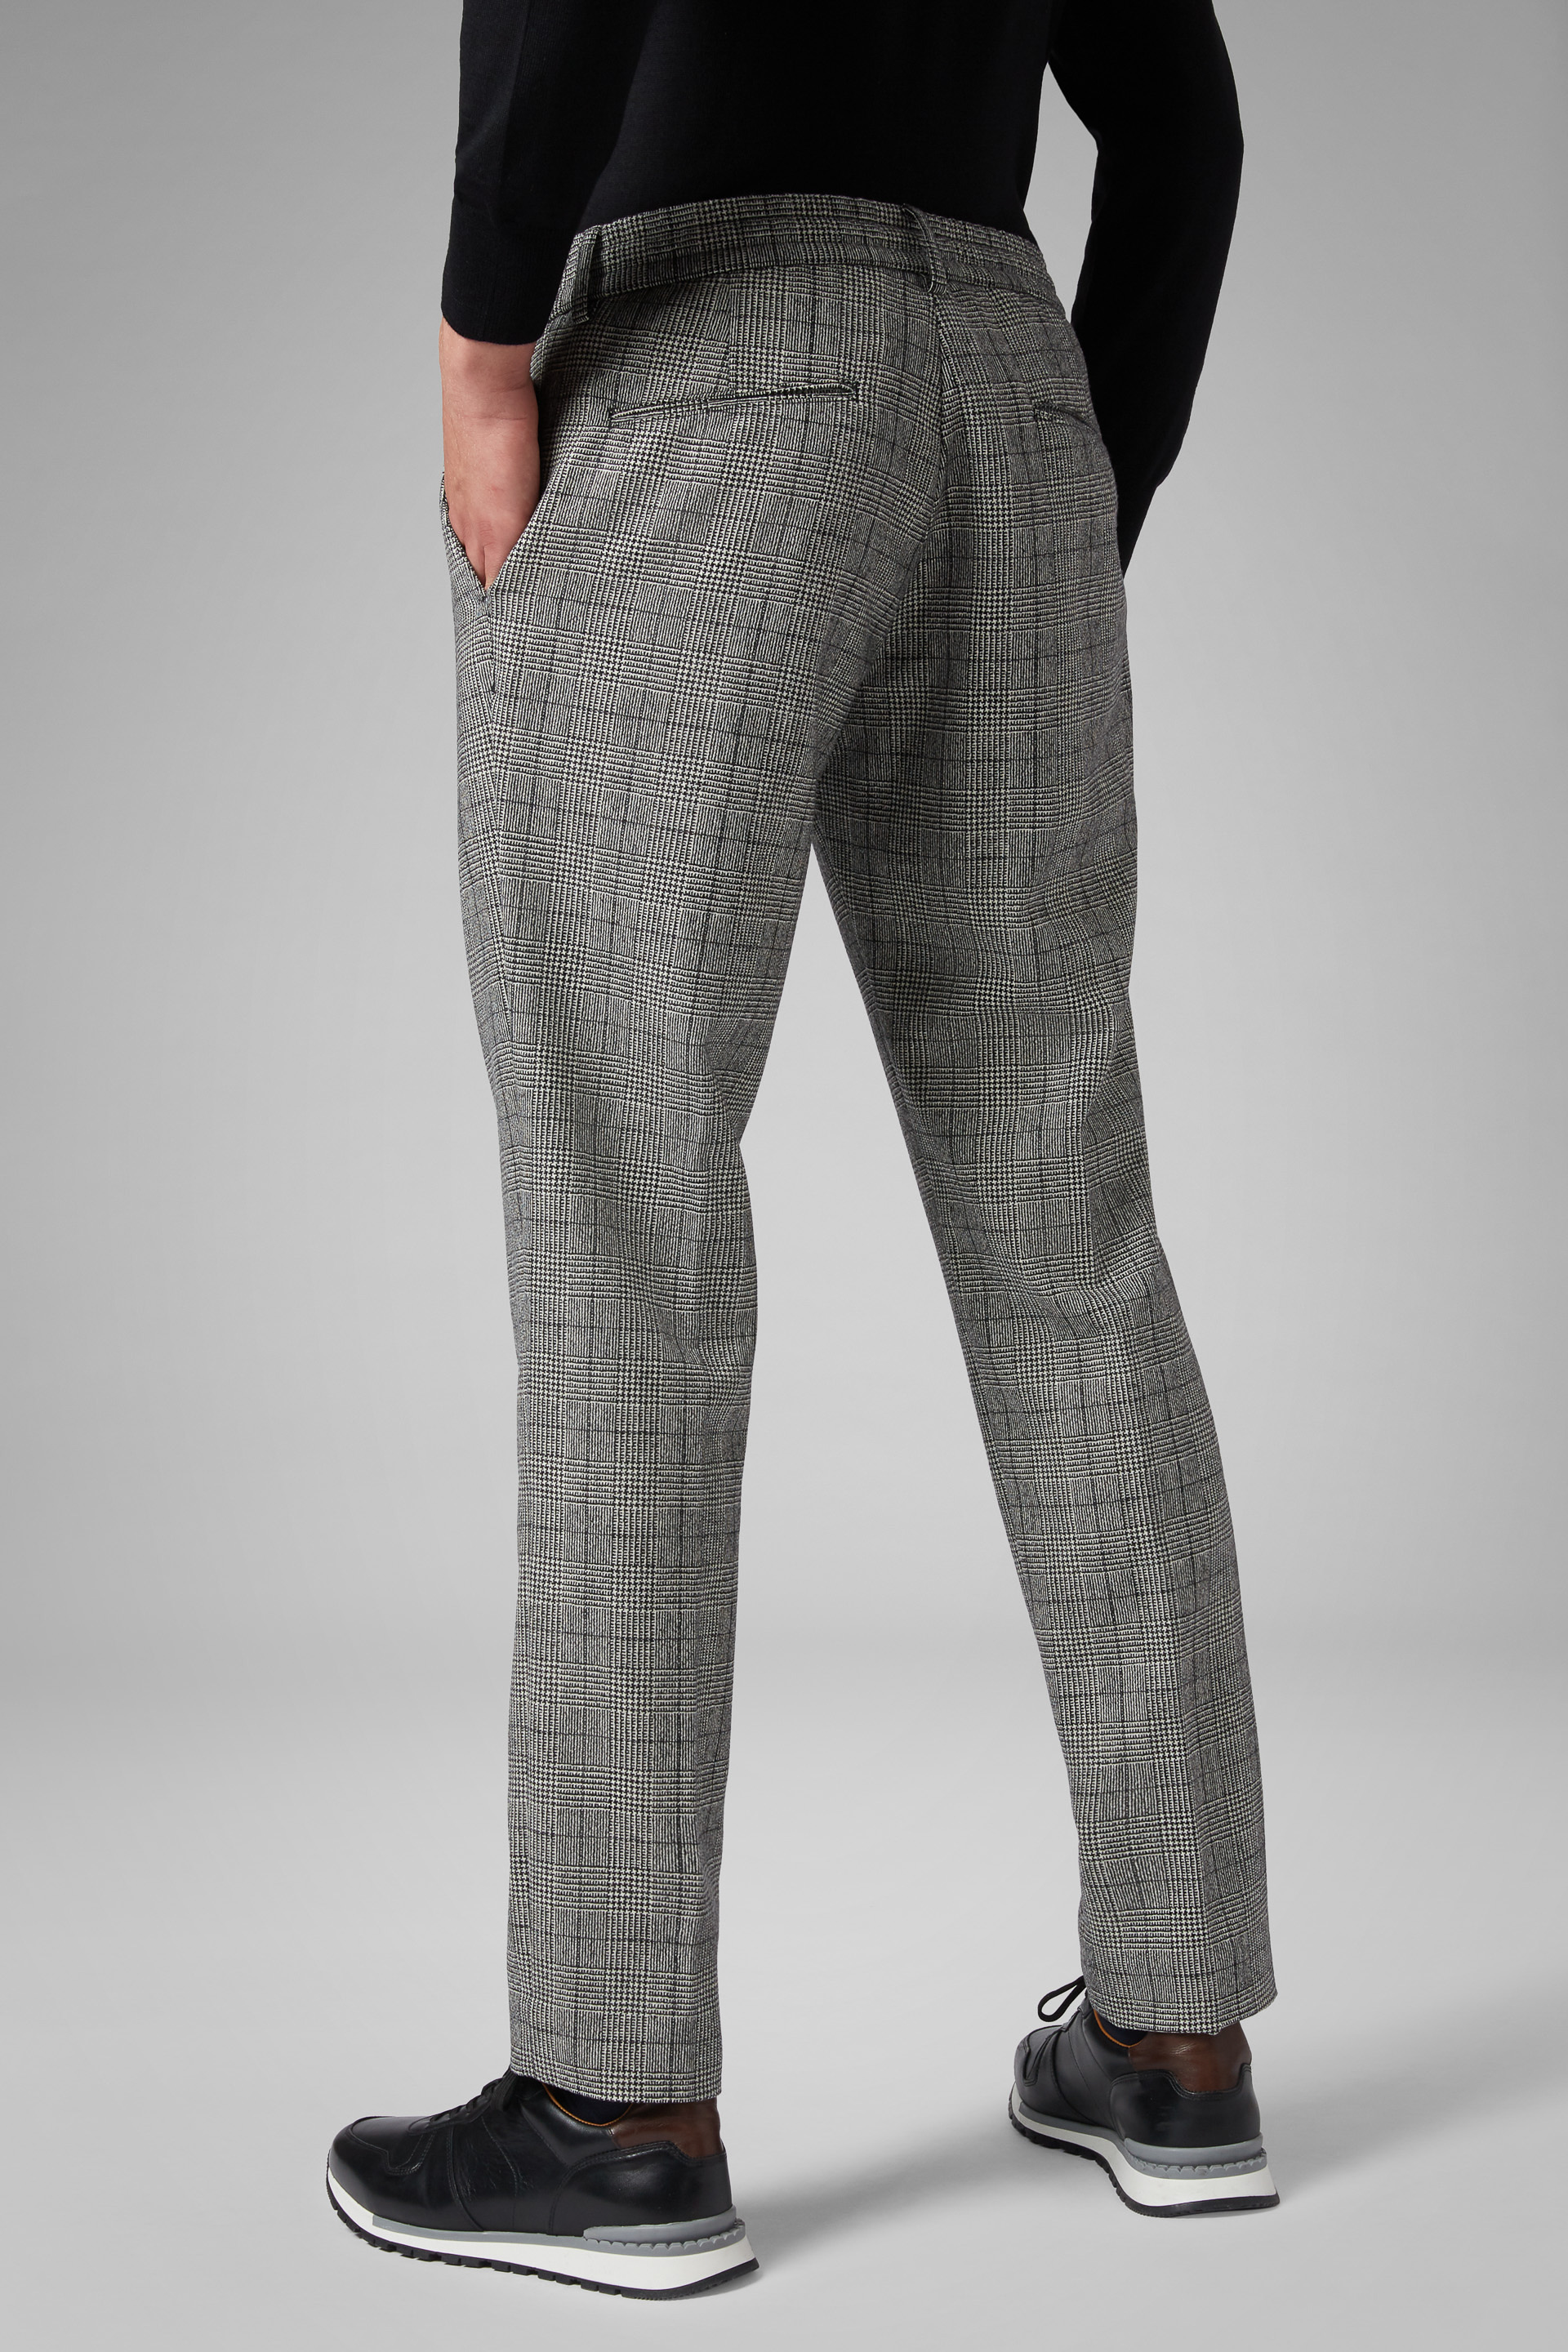 Caine MidGrey Flannel Trousers  Kit Blake